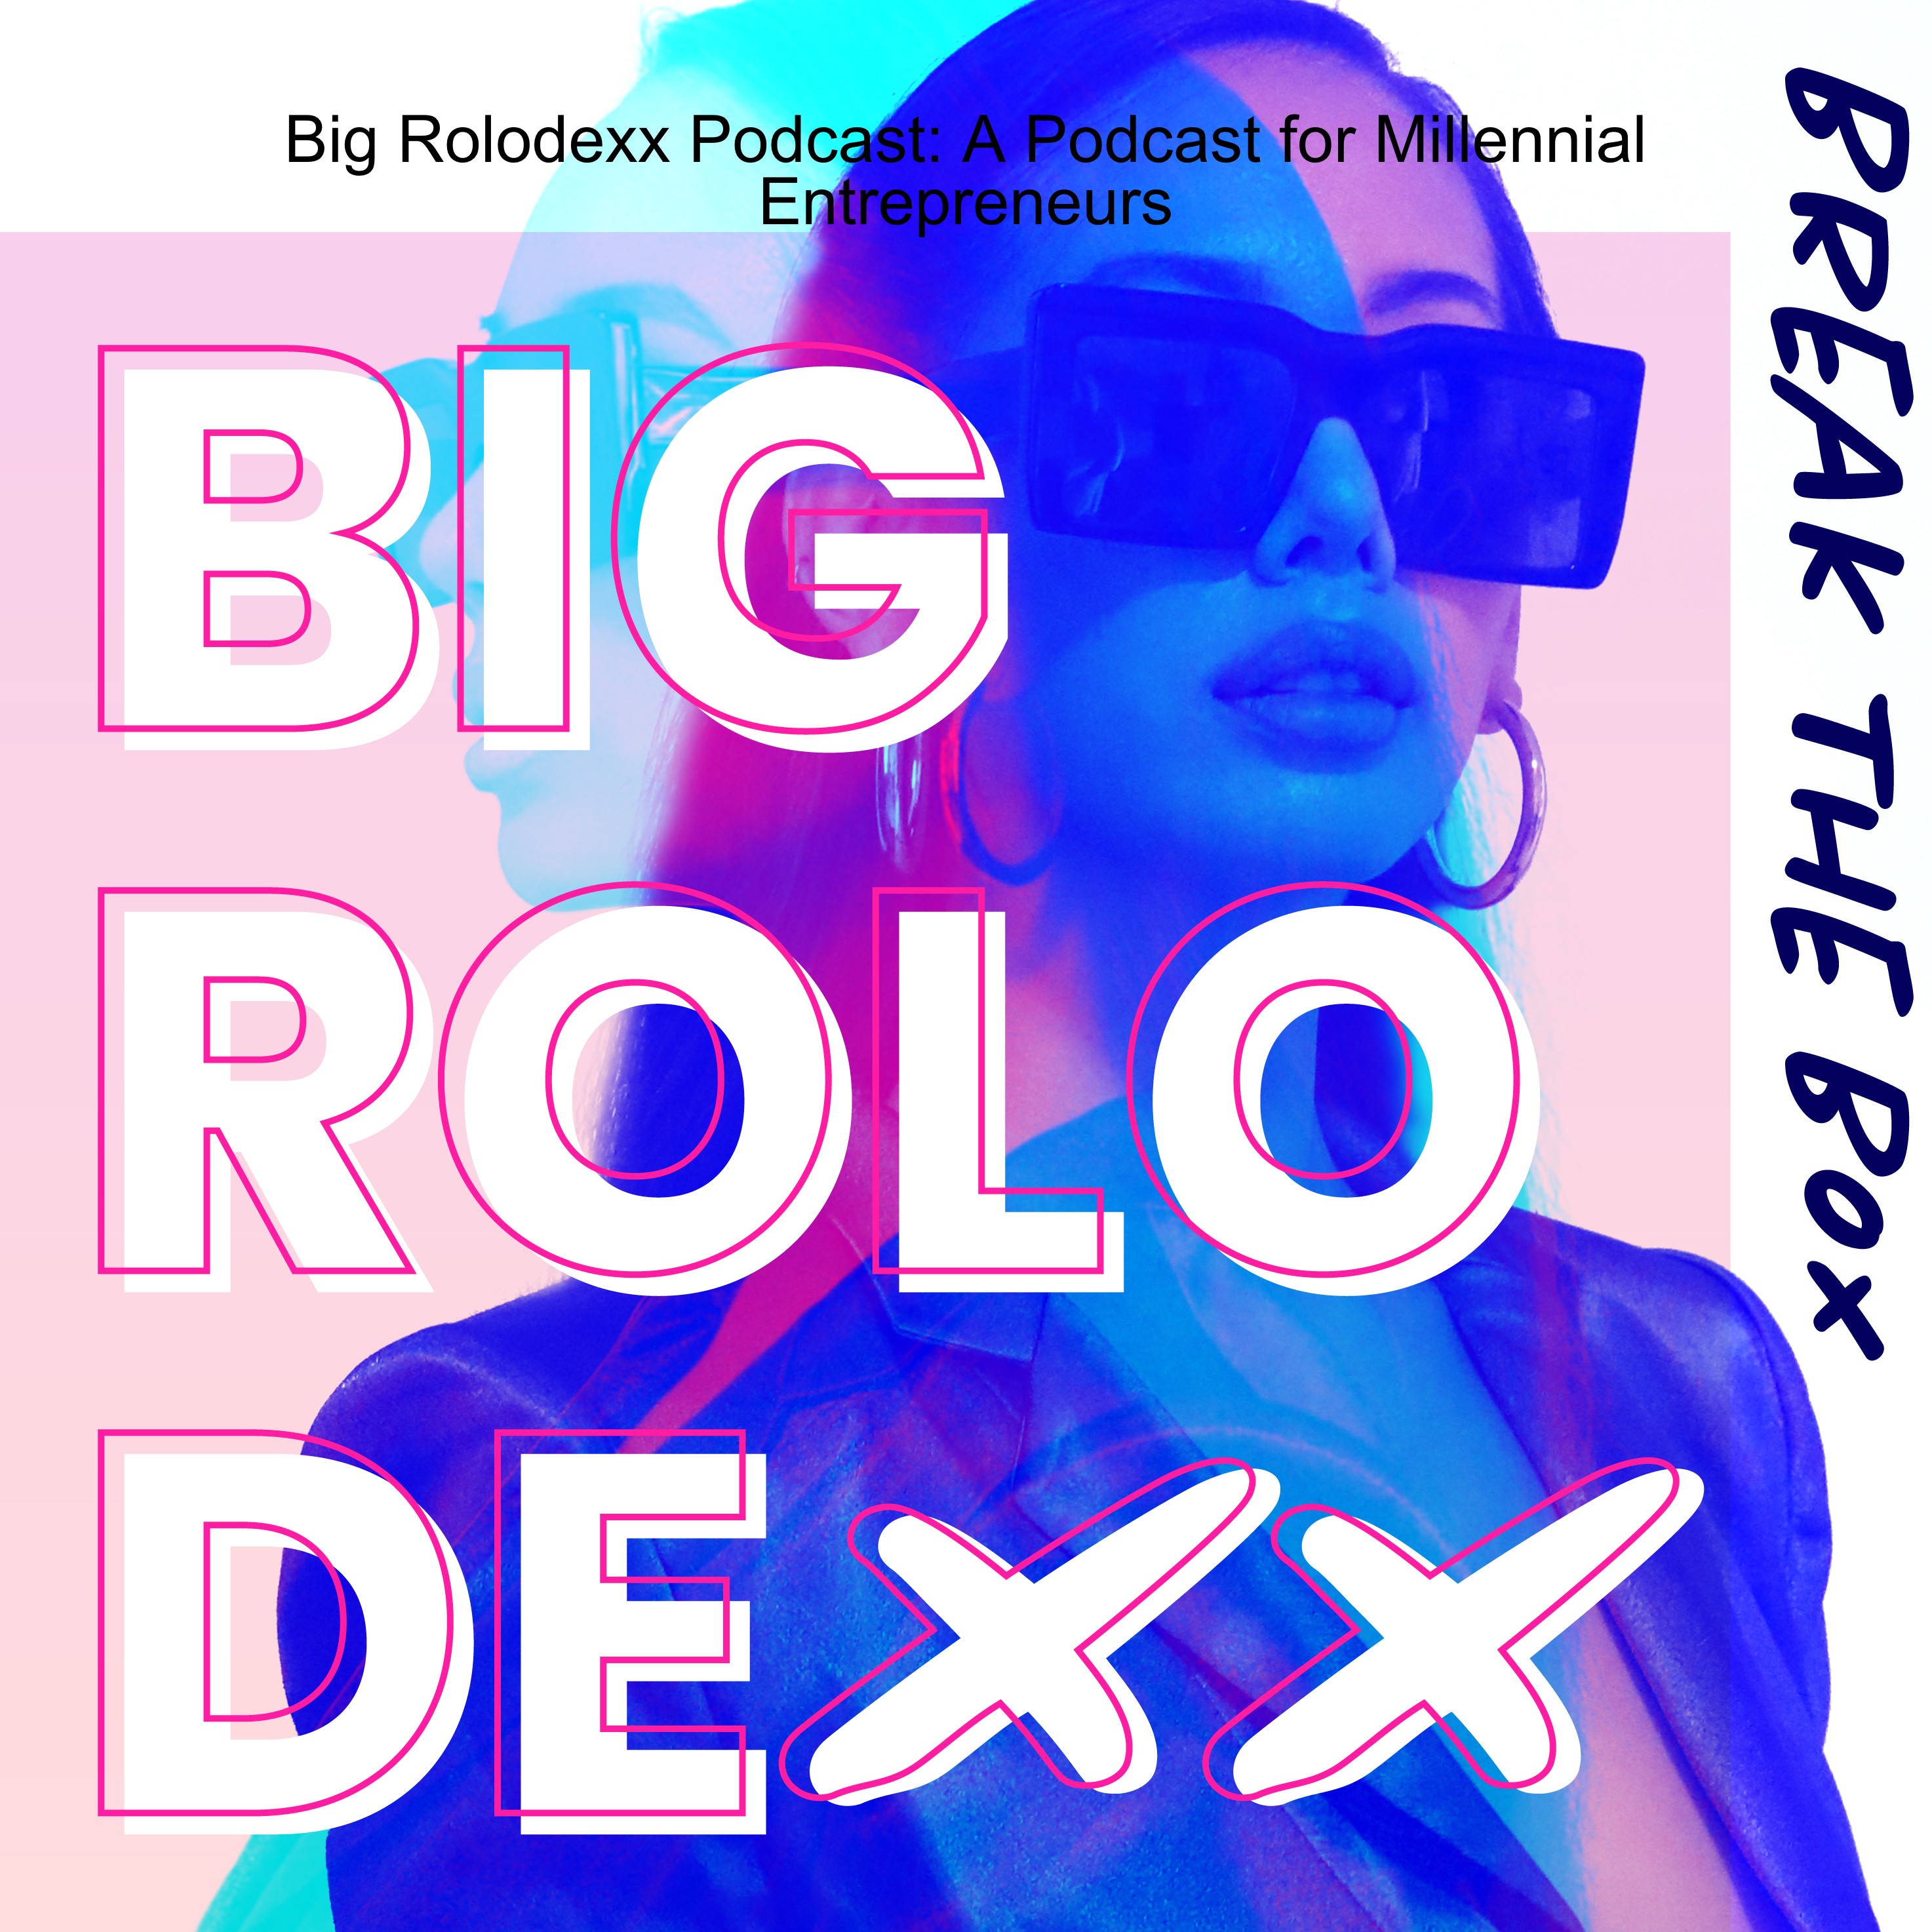 Big Rolodexx Podcast Introduction Trailer: A Podcast for Millennial Entrepreneurs